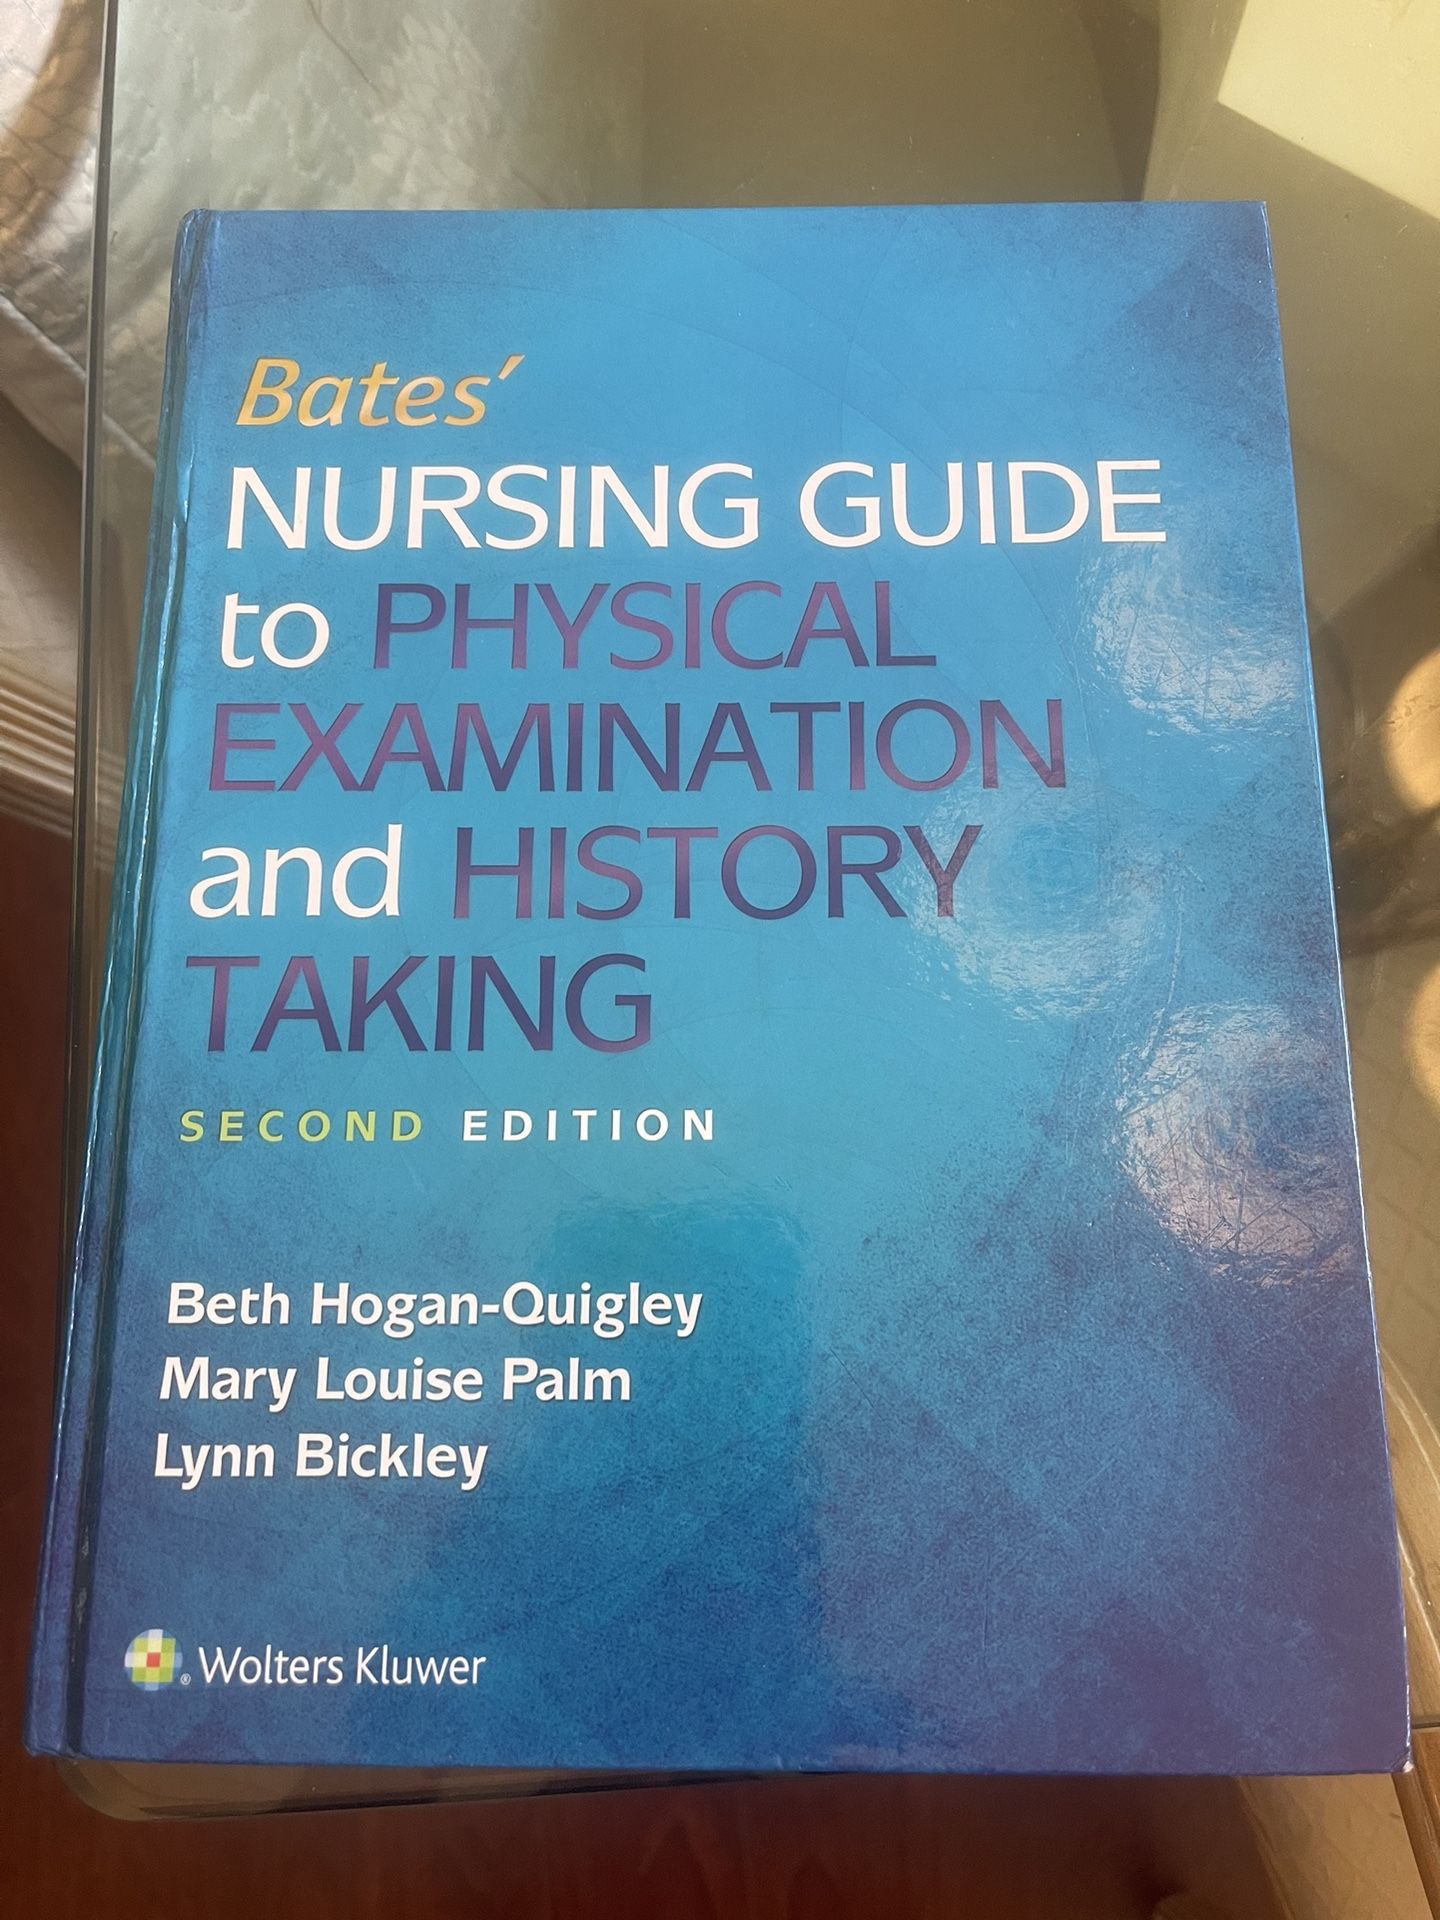 Bates Nursing Guide To Physical Assessment & History Taking 2nd Ed.